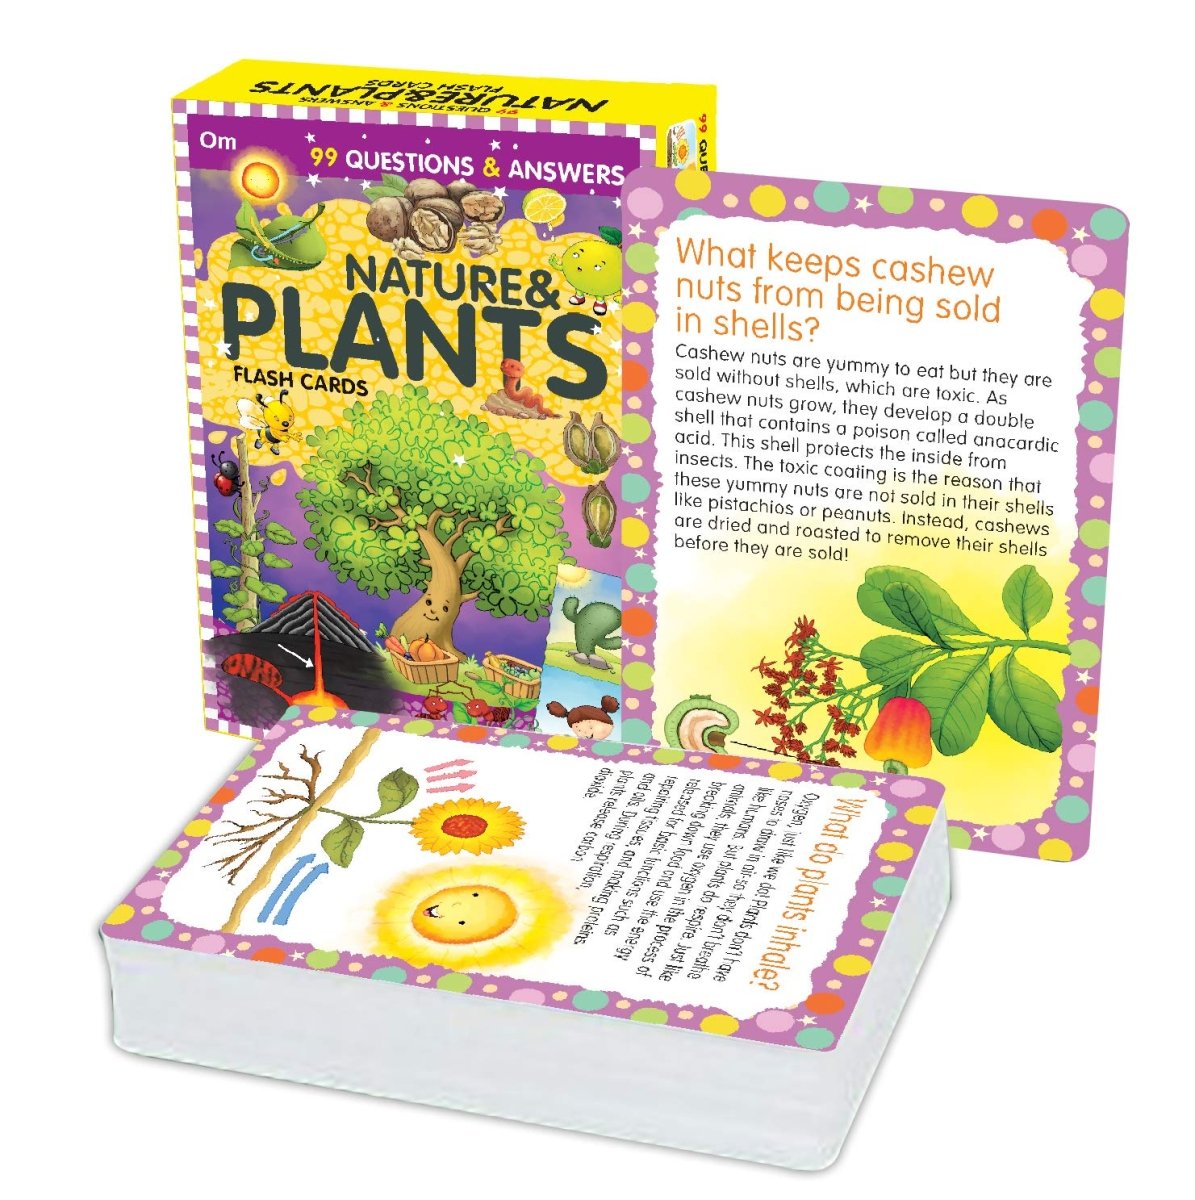 Om Books International 99 Questions and Answers Natures and Plants Flash Cards - 9789352769179